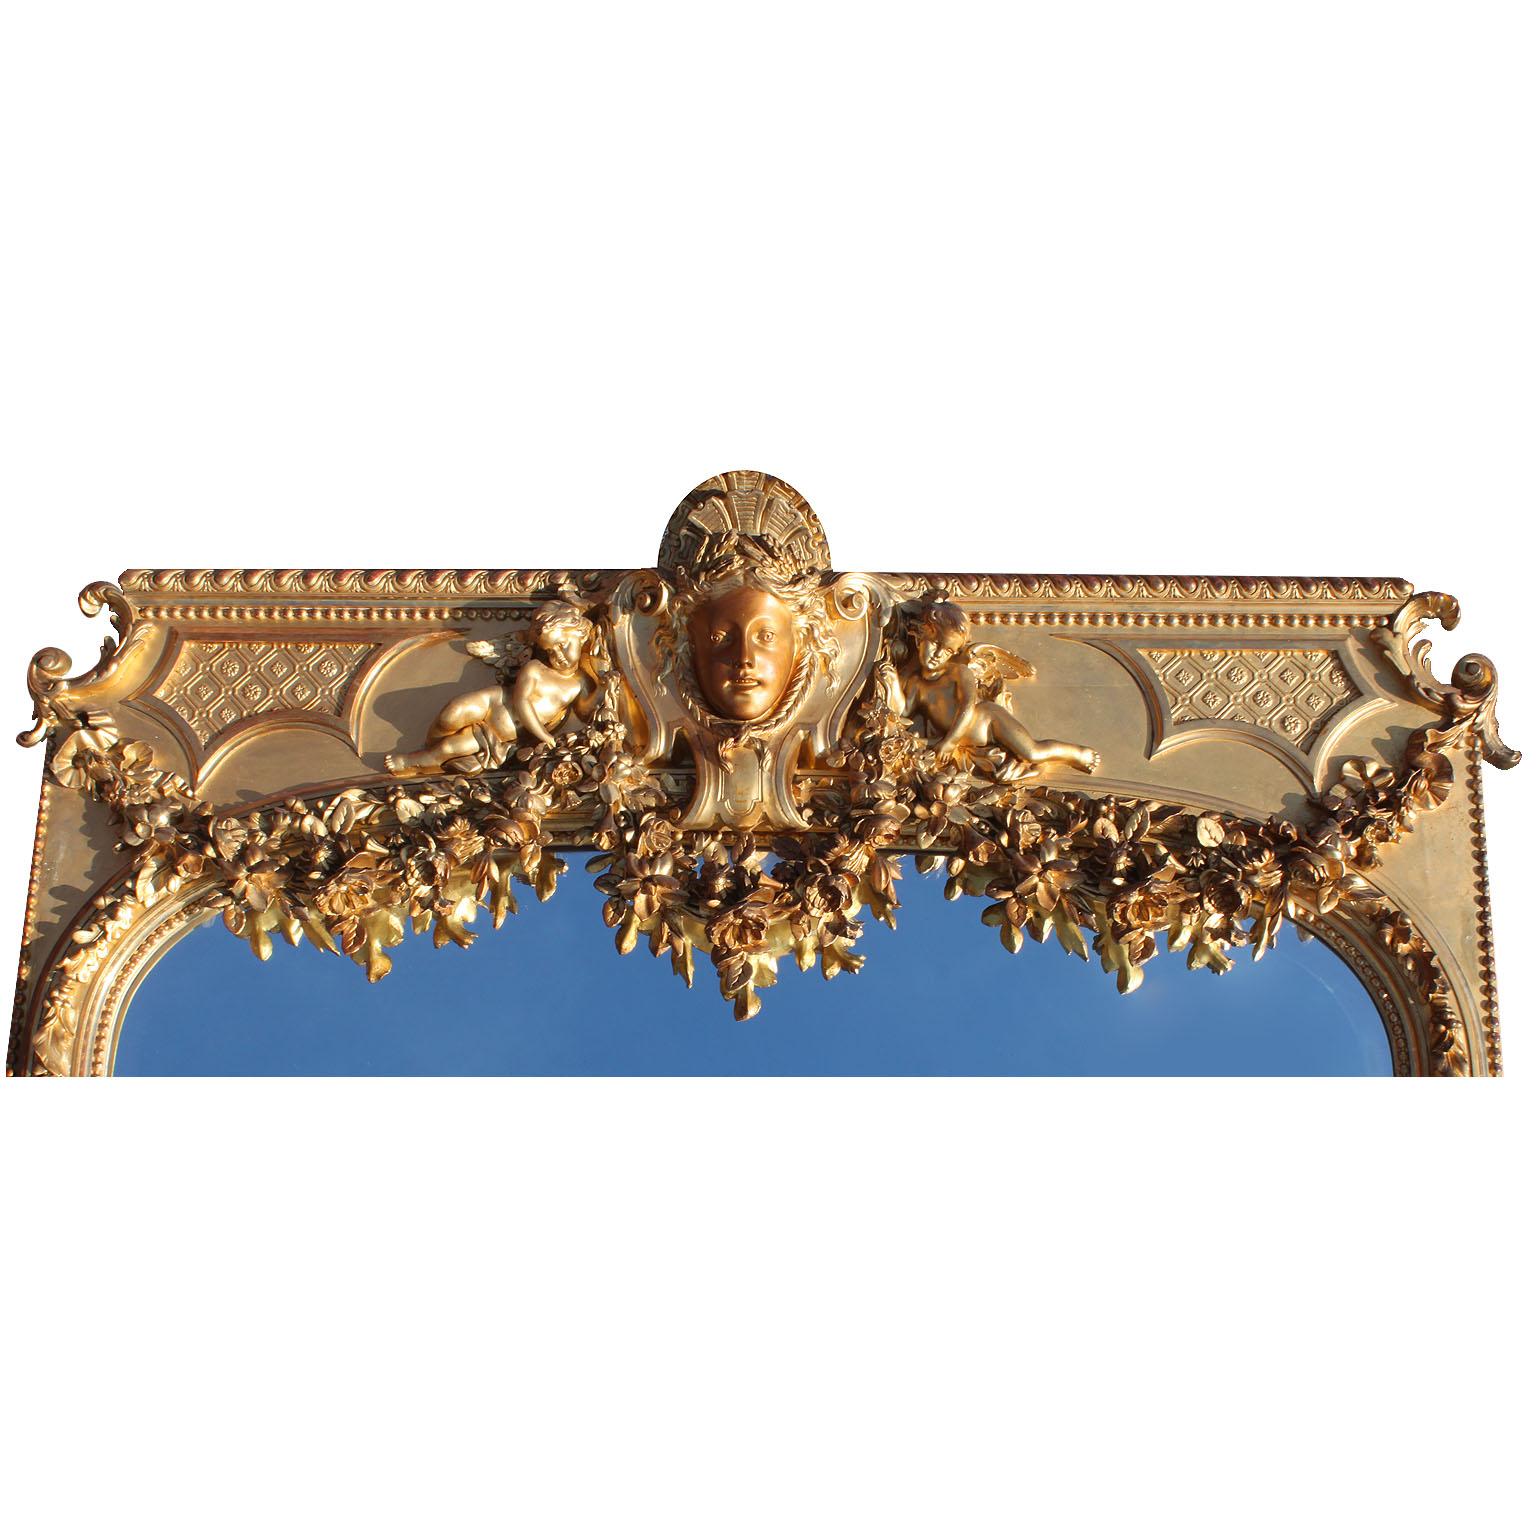 A very fine and palatial French 19th century Louis XV style carved giltwood and gesso figural beveled mirror frame trumeau. The arched plate within a main foliate and acorn trailing border, surmounted by ribbon tied floral swags centered by a mask